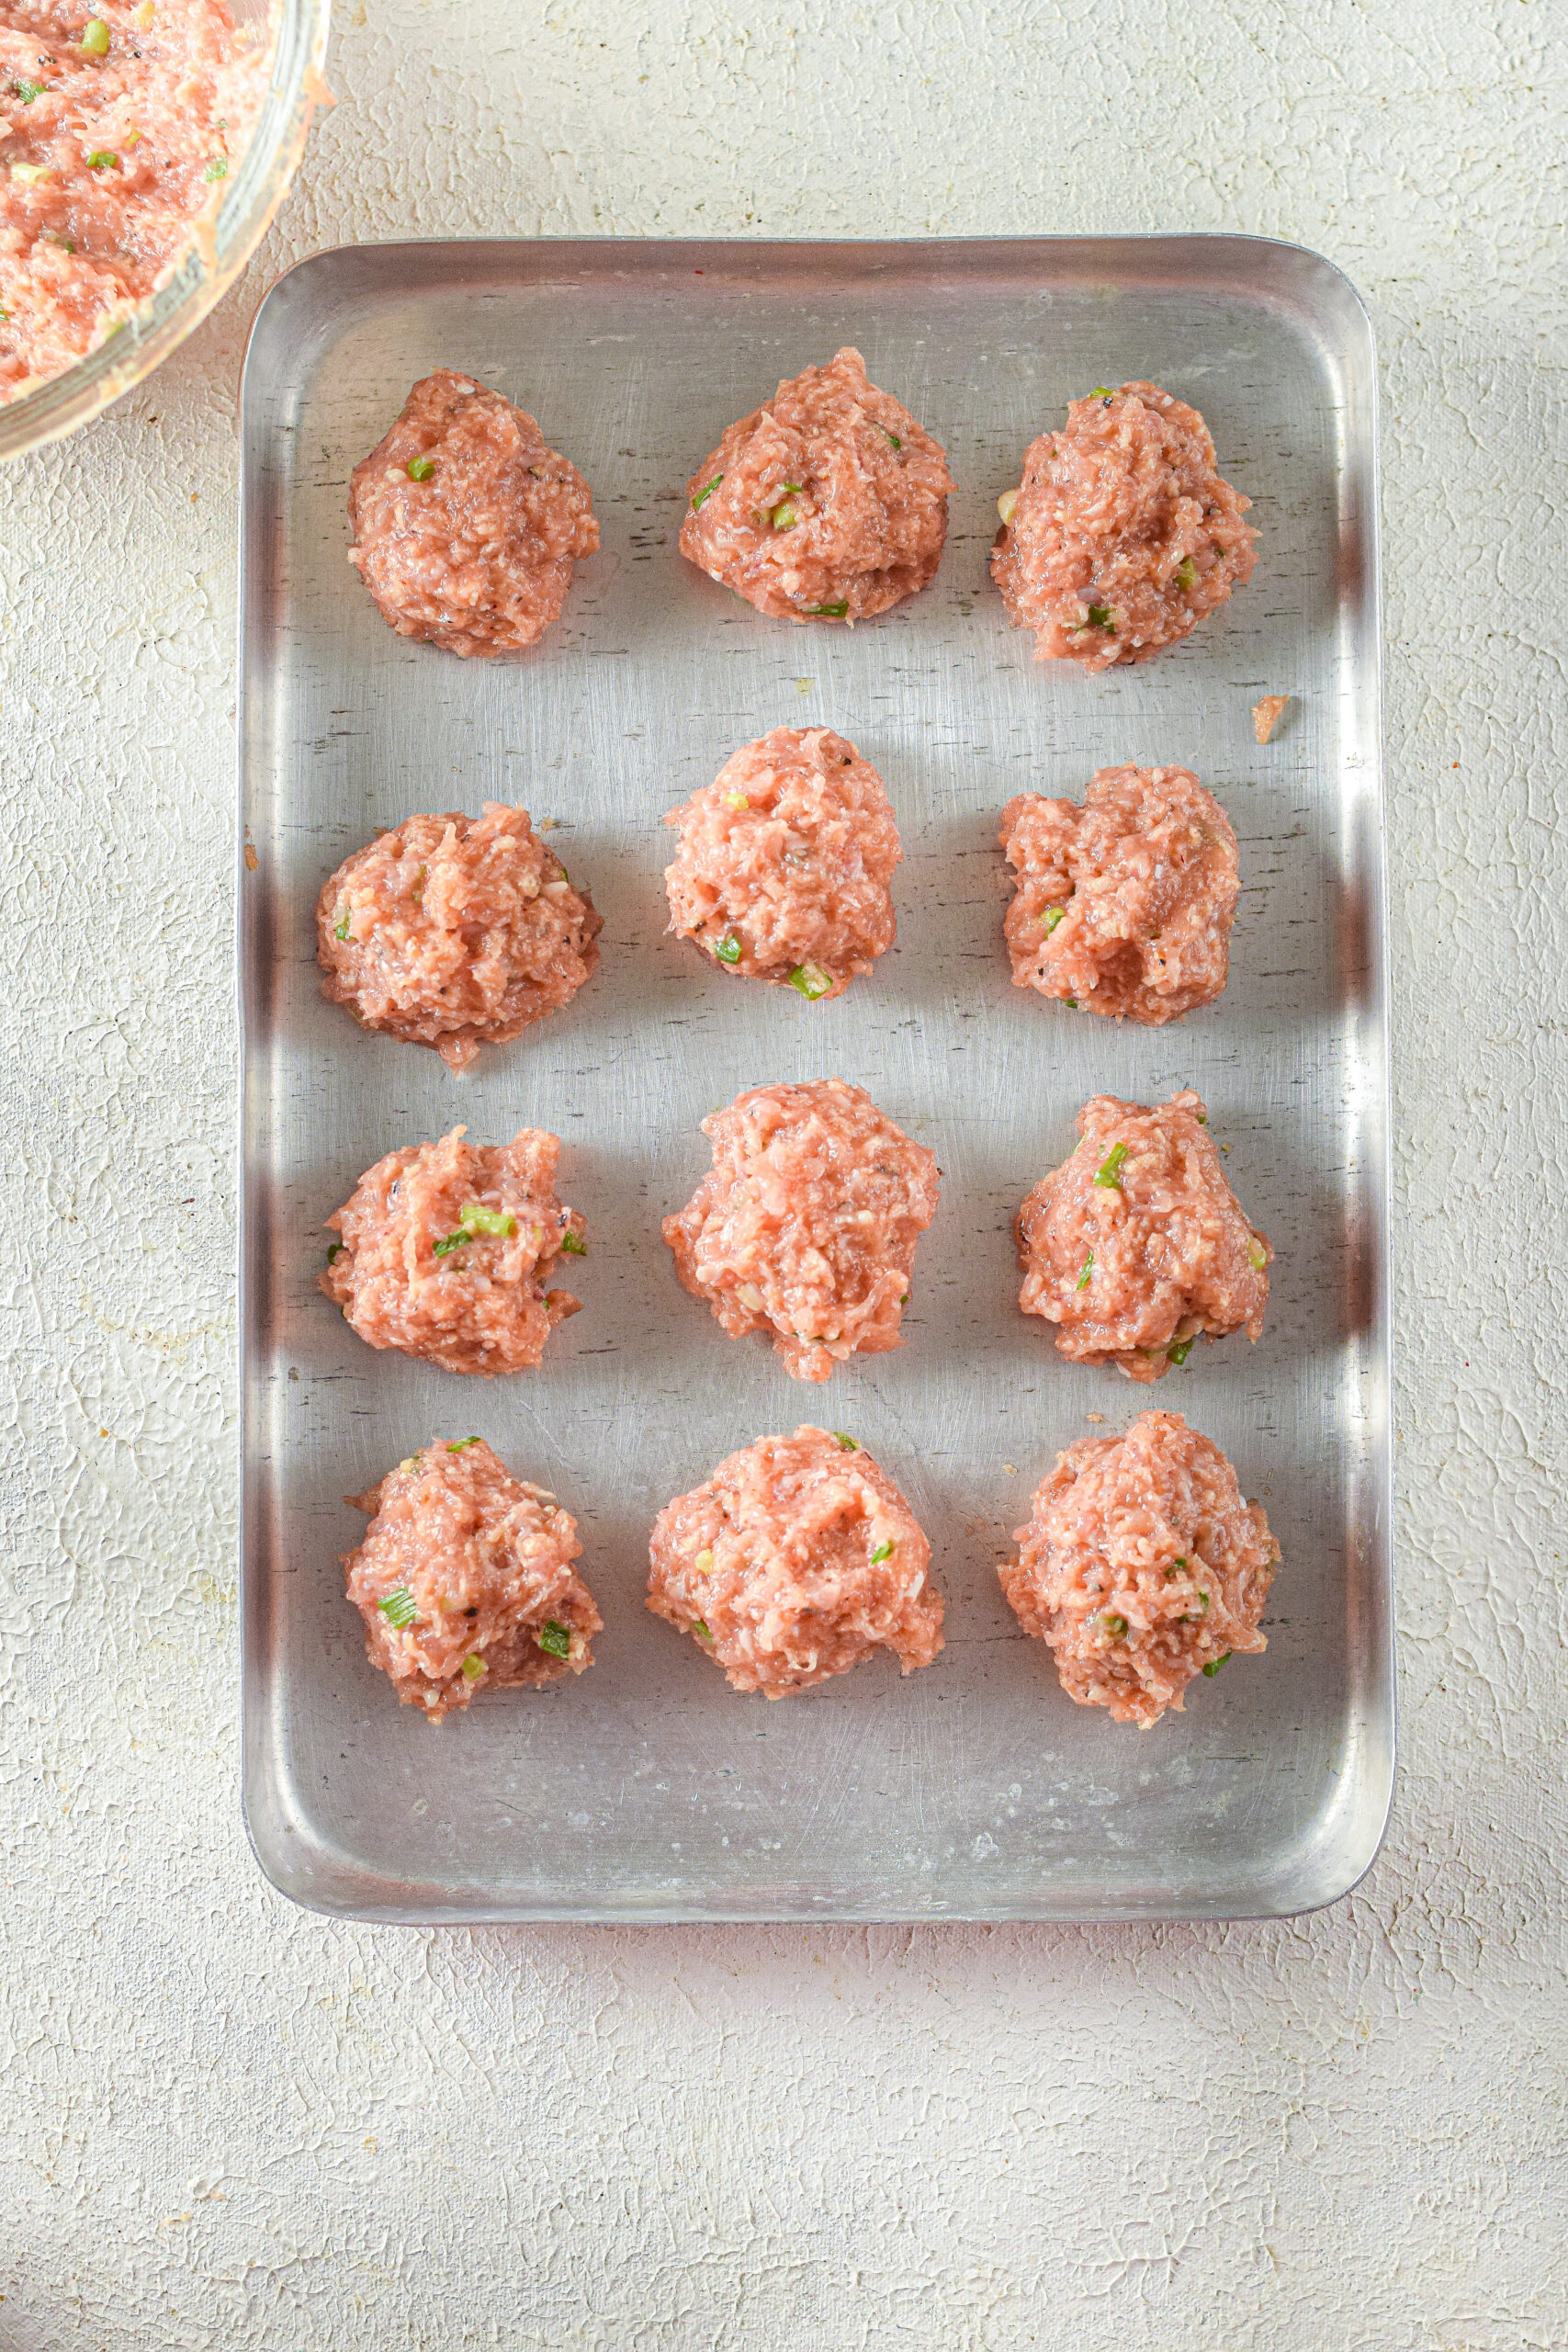 uncooked meatballs on a pan.